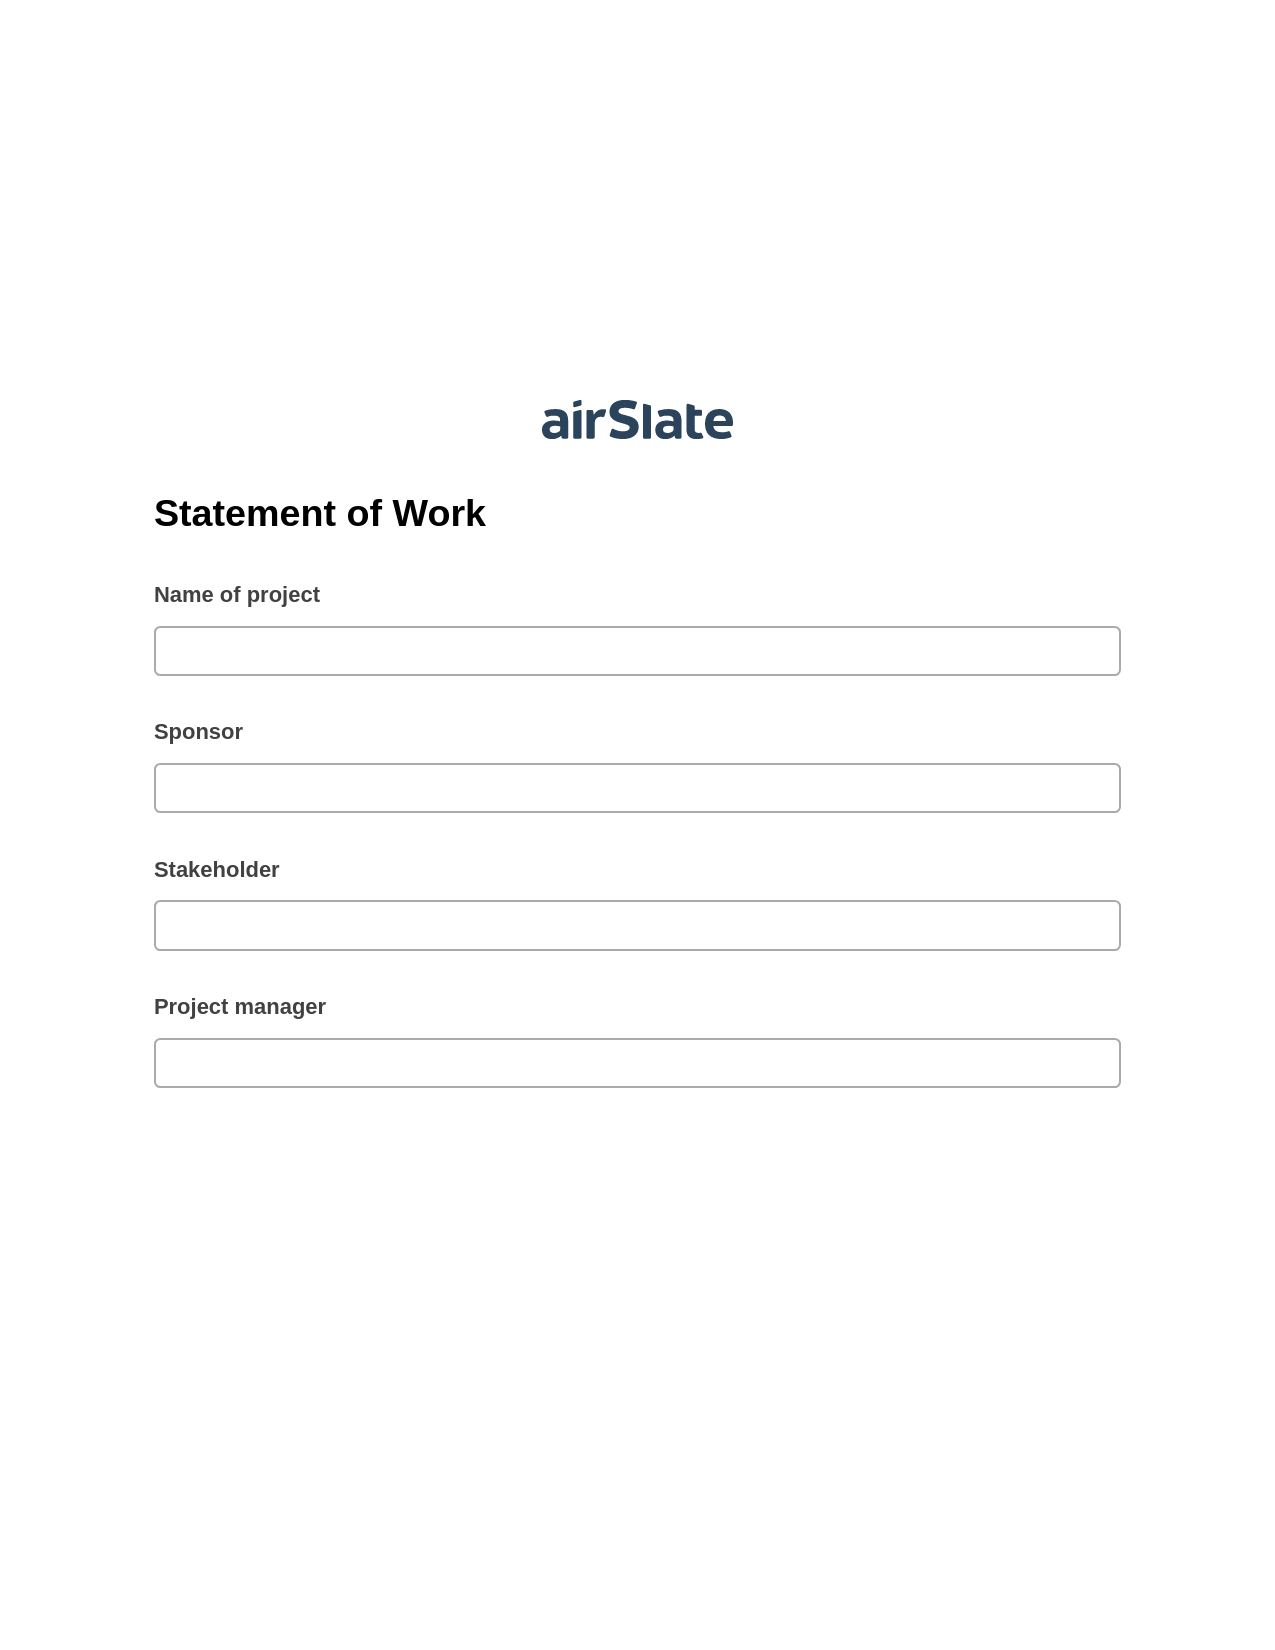 Statement of Work Pre-fill from Google Sheet Dropdown Options Bot, Add Tags to Slate Bot, Export to Excel 365 Bot